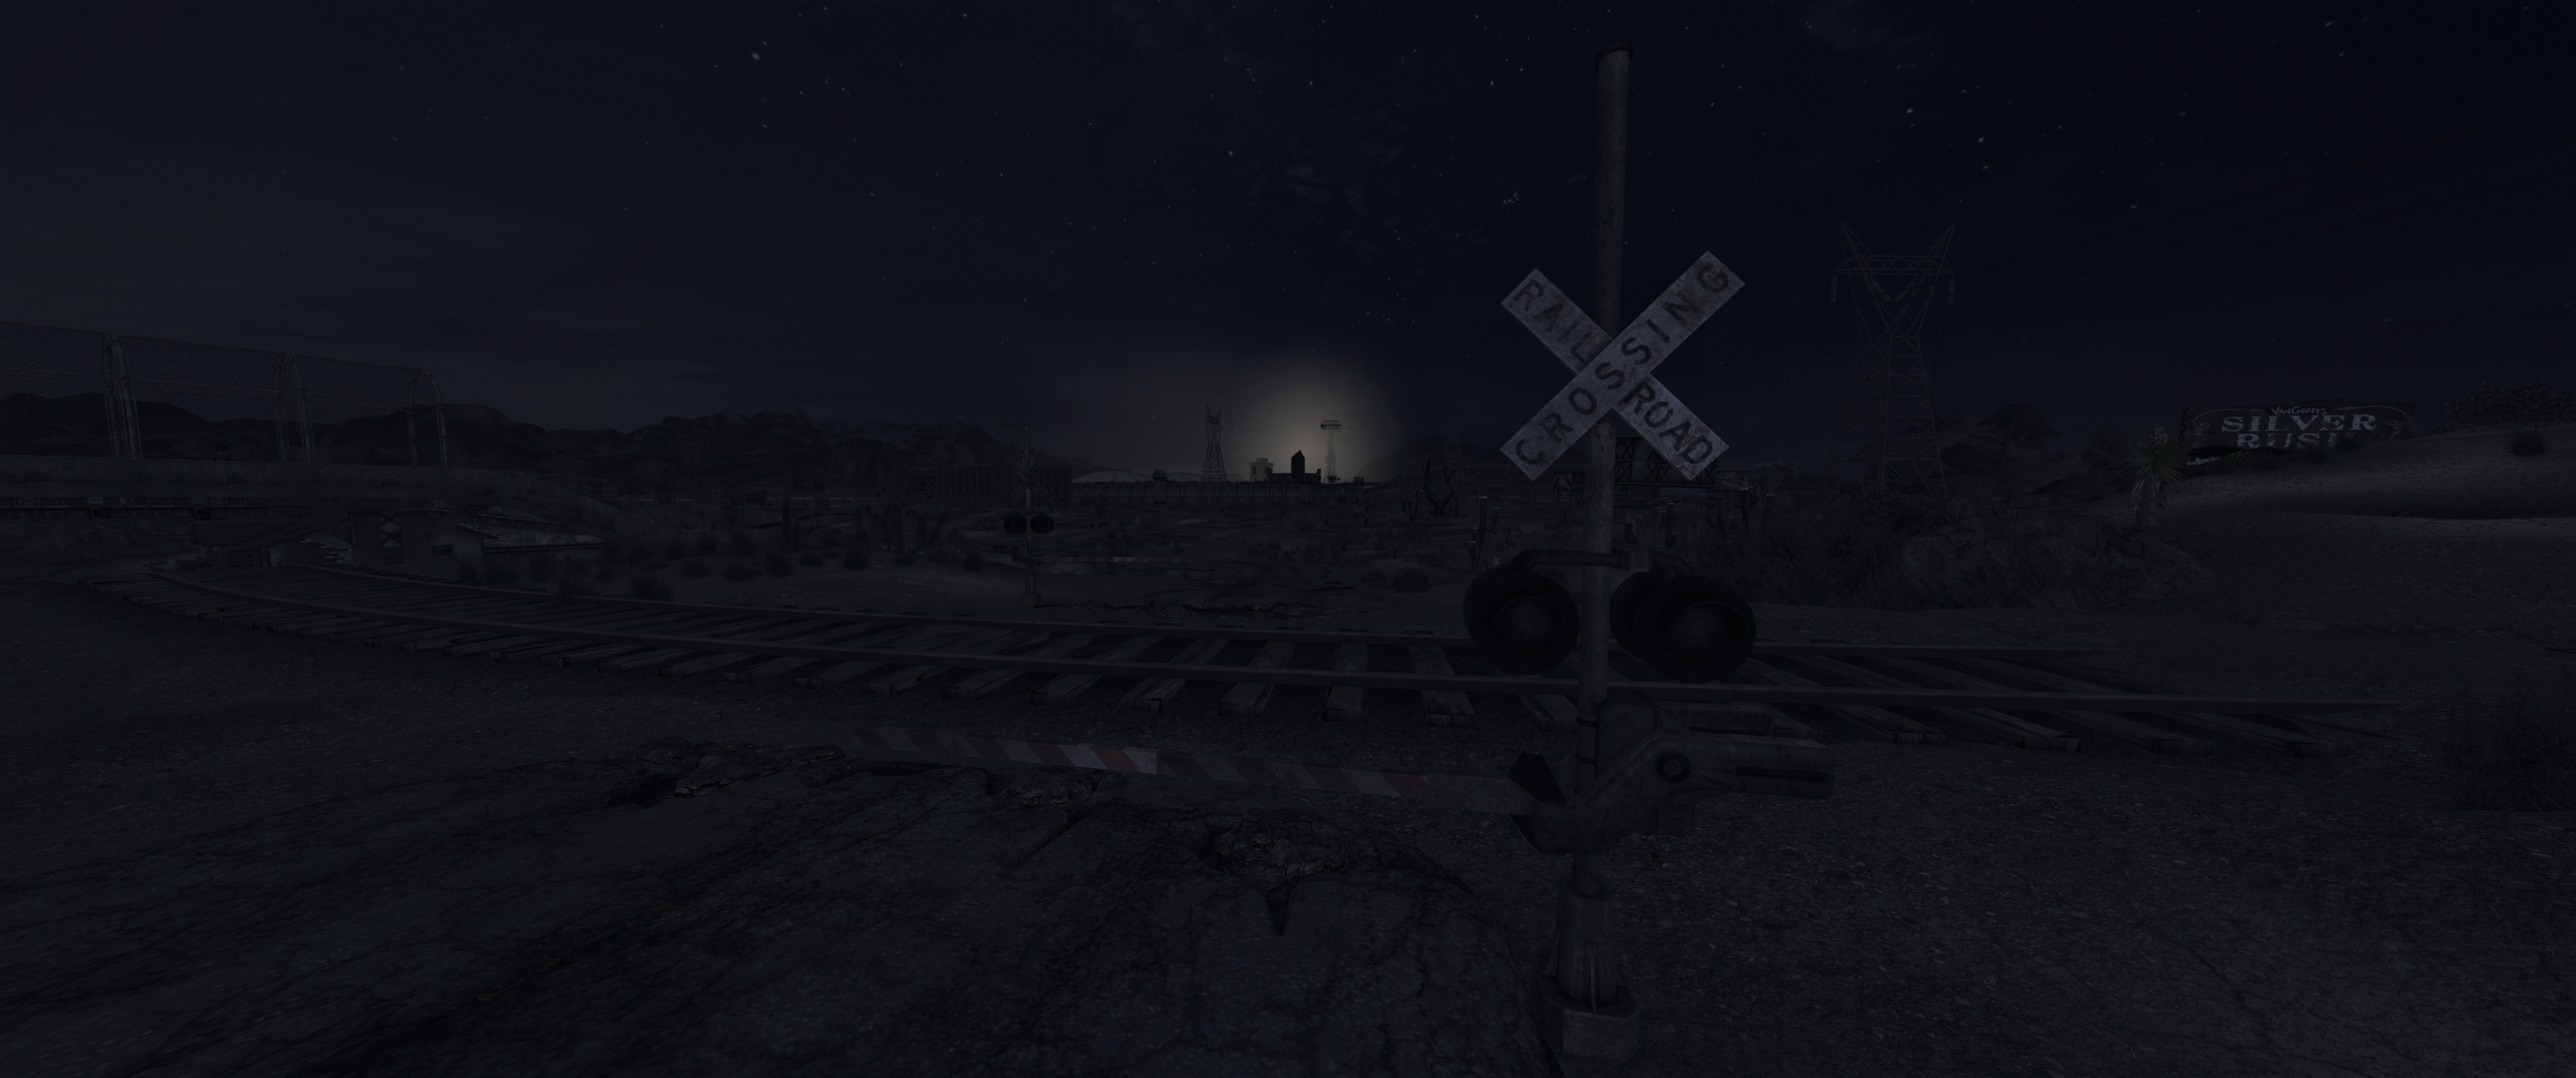 General 3440x1440 Fallout: New Vegas night railway crossing Nevada video games signs Obsidian Entertainment Bethesda Softworks post apocalypse